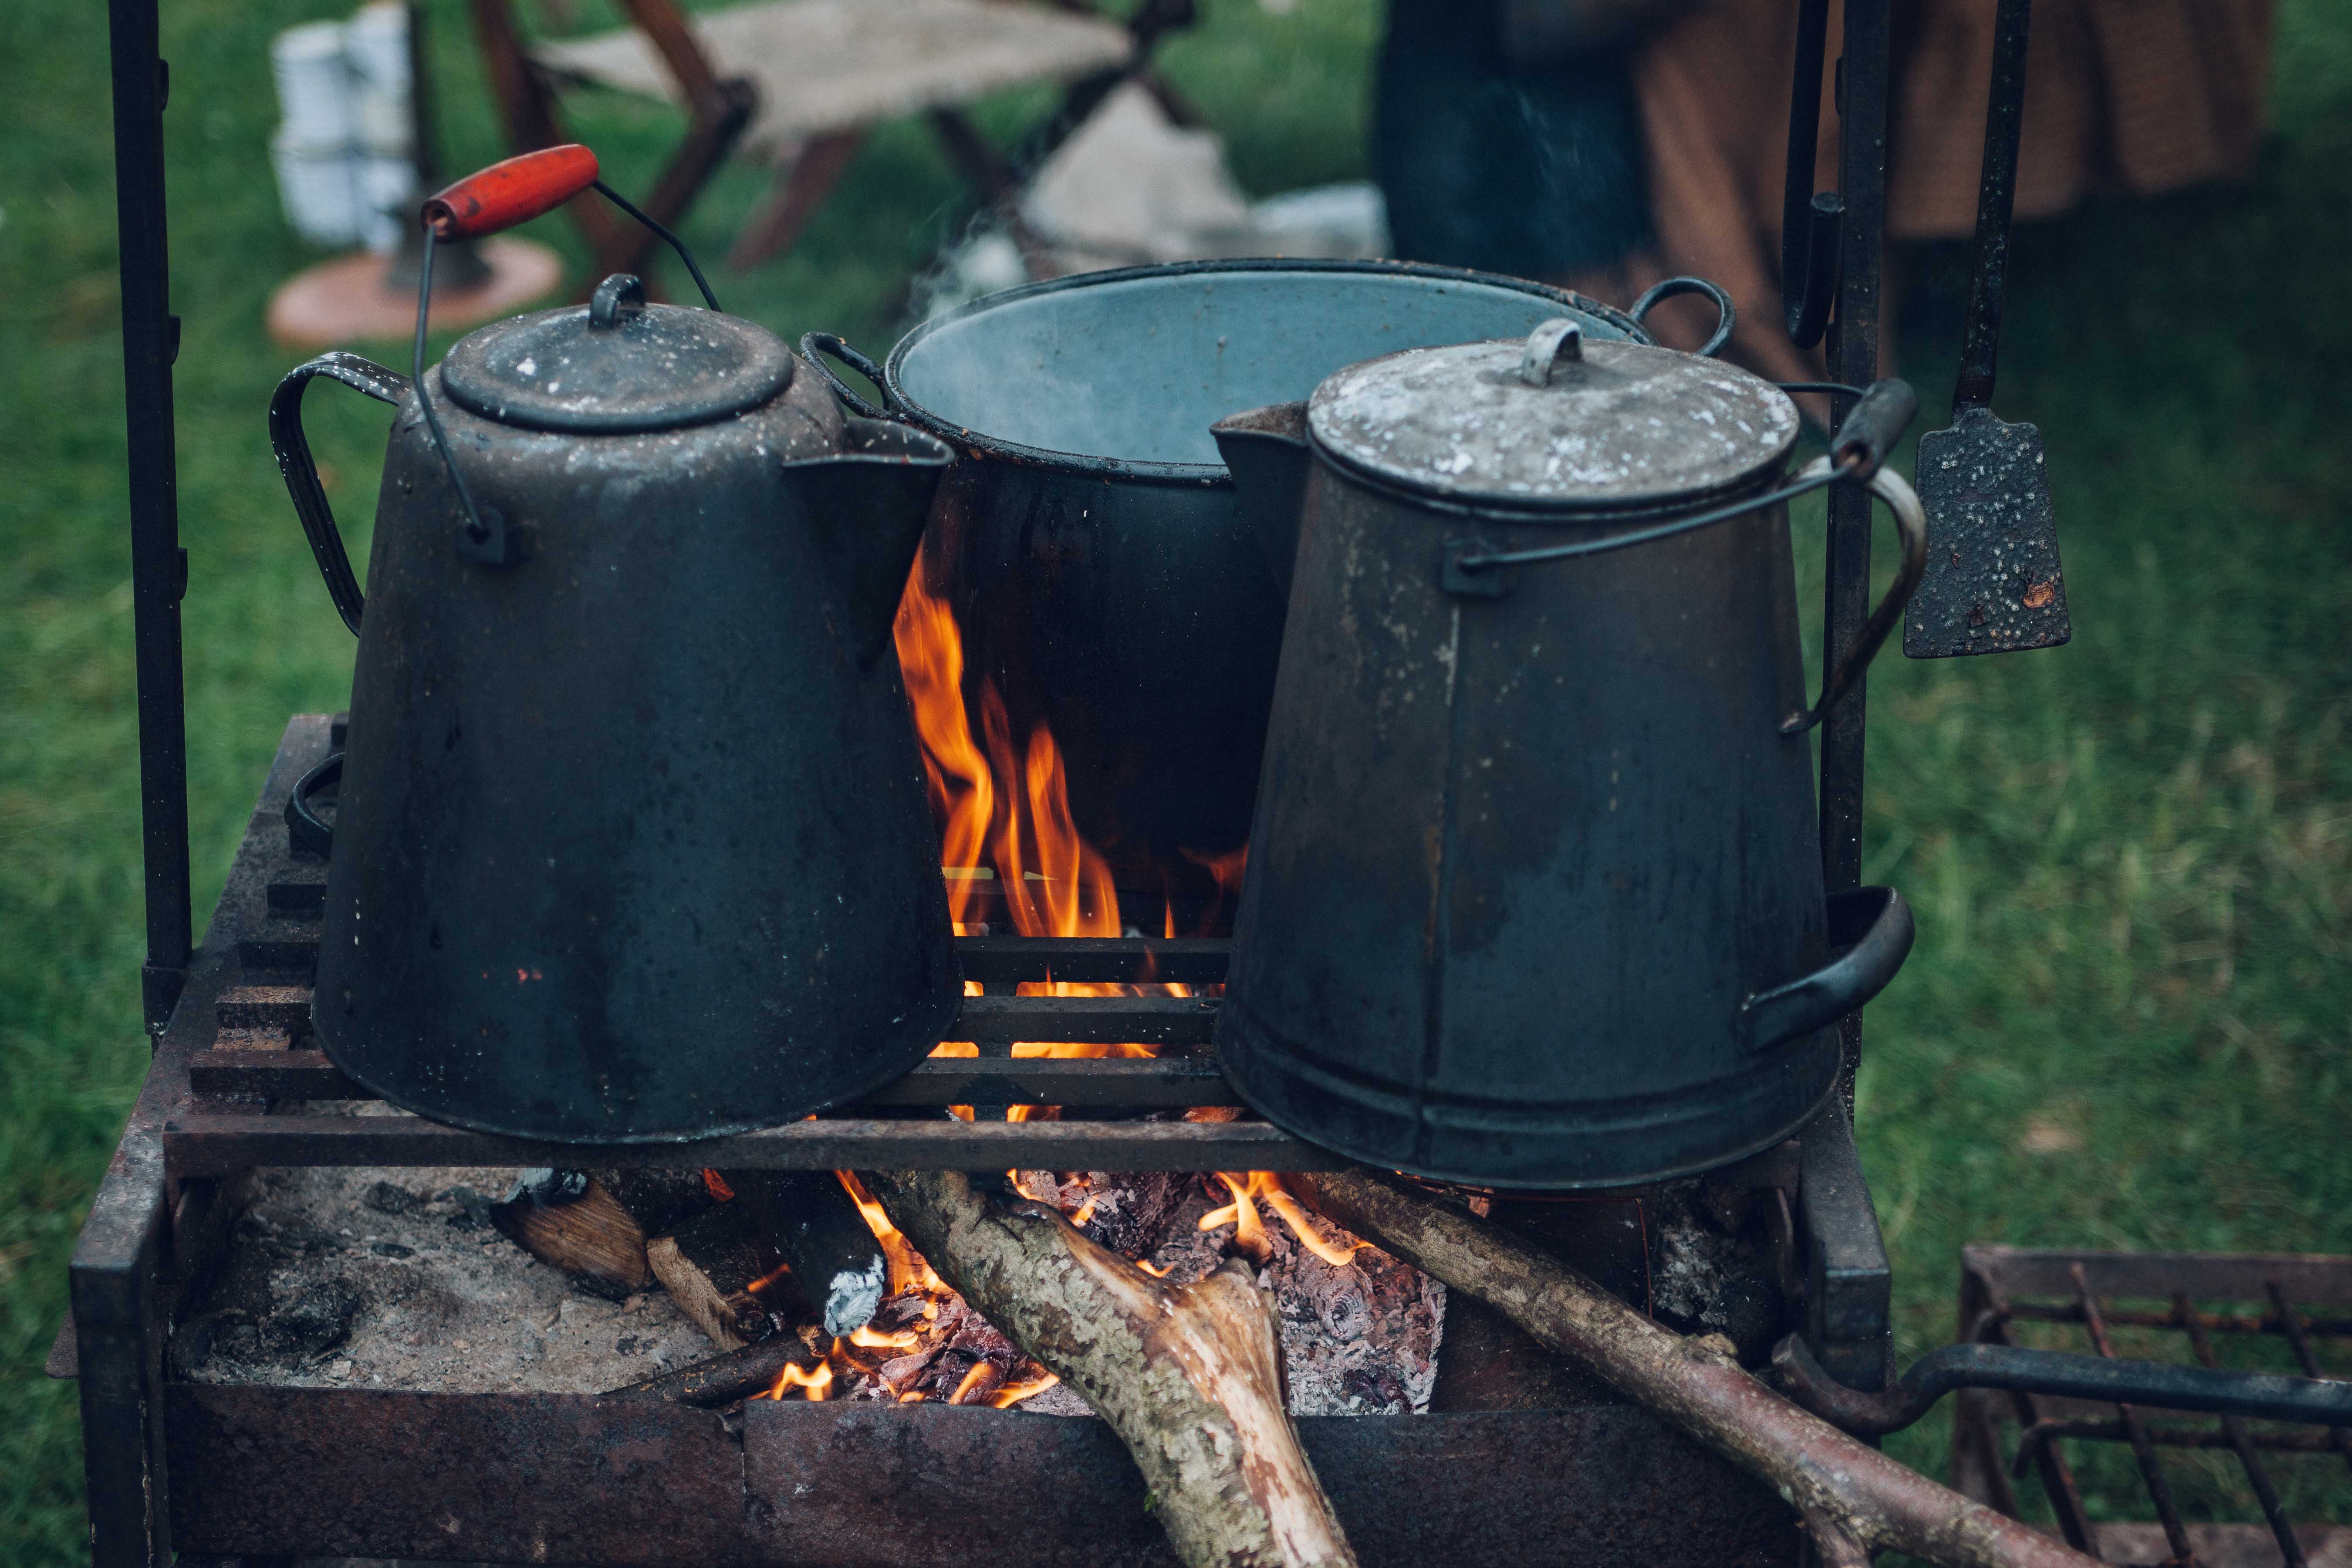 Pitch and Canvas | Glamping and Camping in Cheshire | Making tea over fire pit